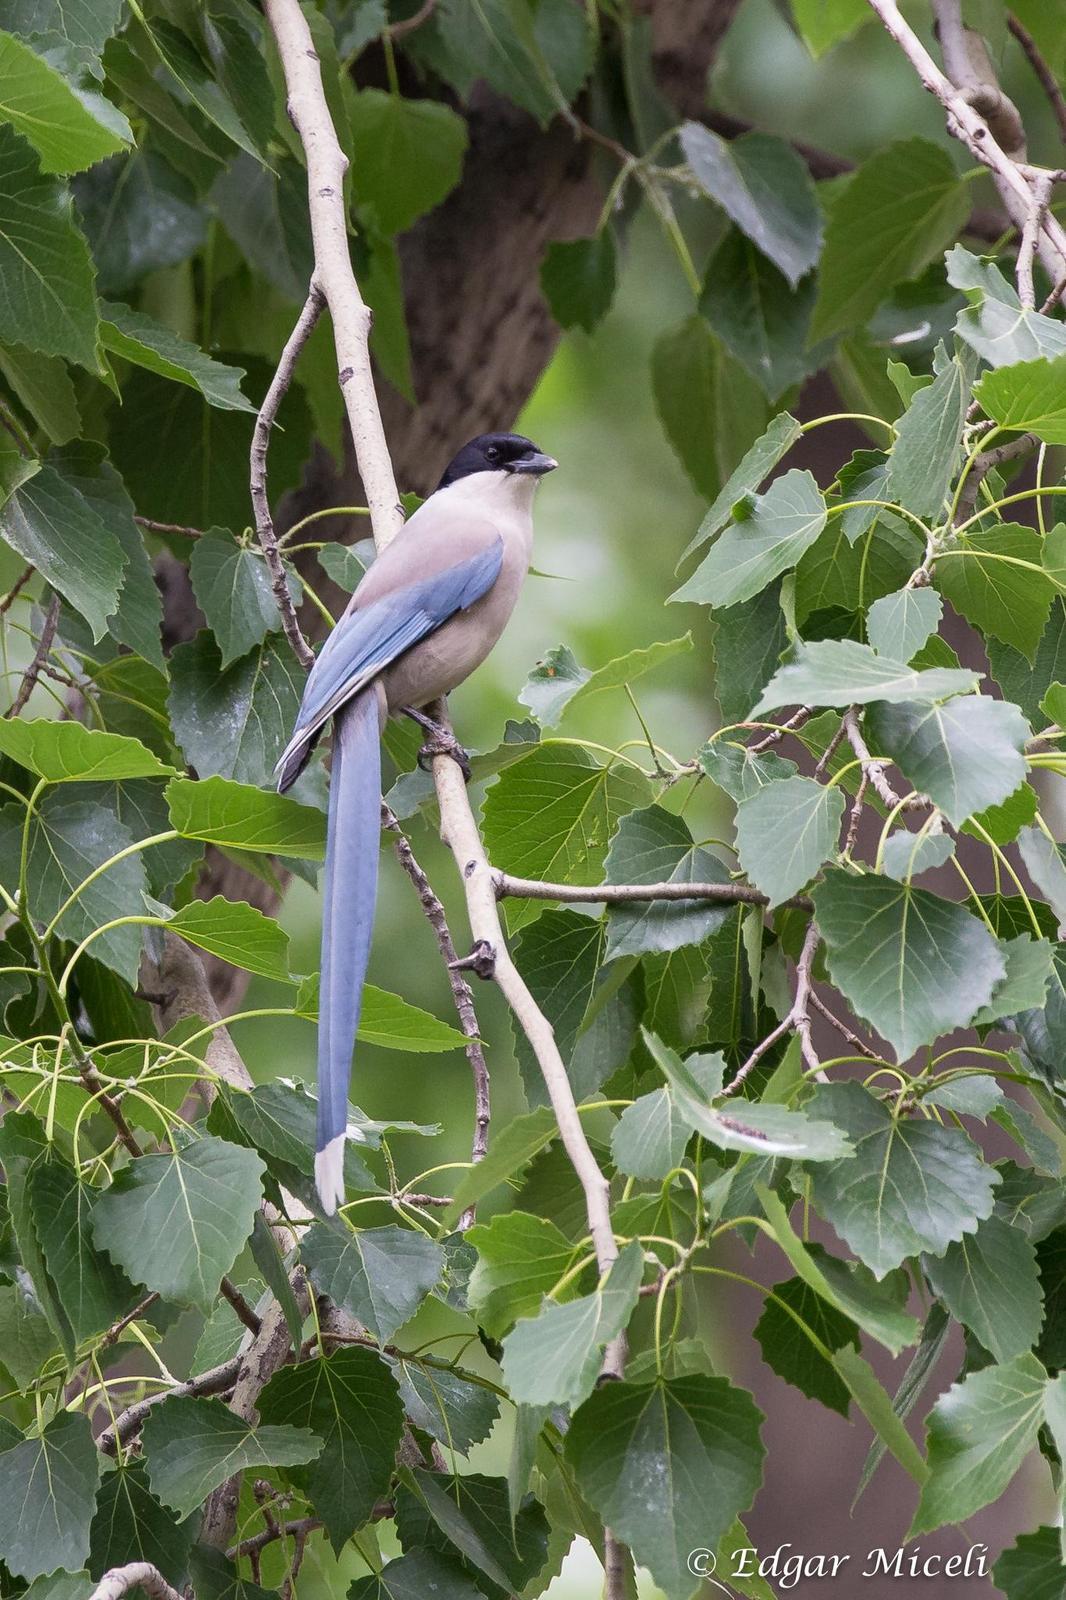 Azure-winged Magpie Photo by Edgar Miceli